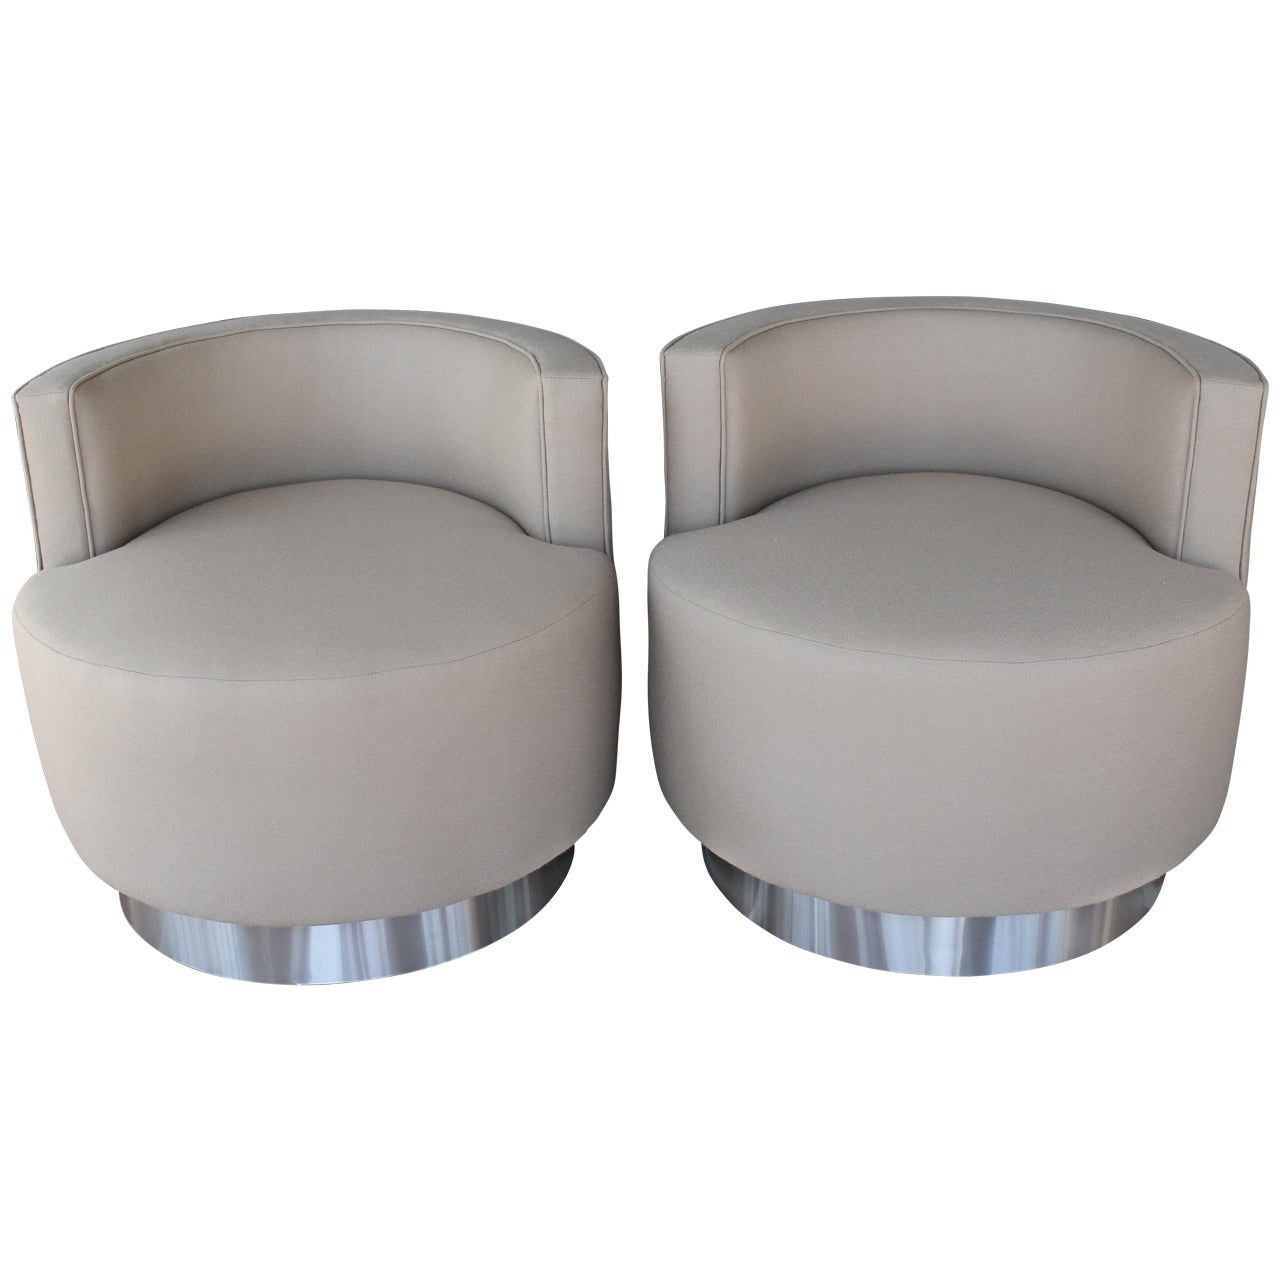 Pair of Swivel Barrel Chairs, in the style of Milo Baughman